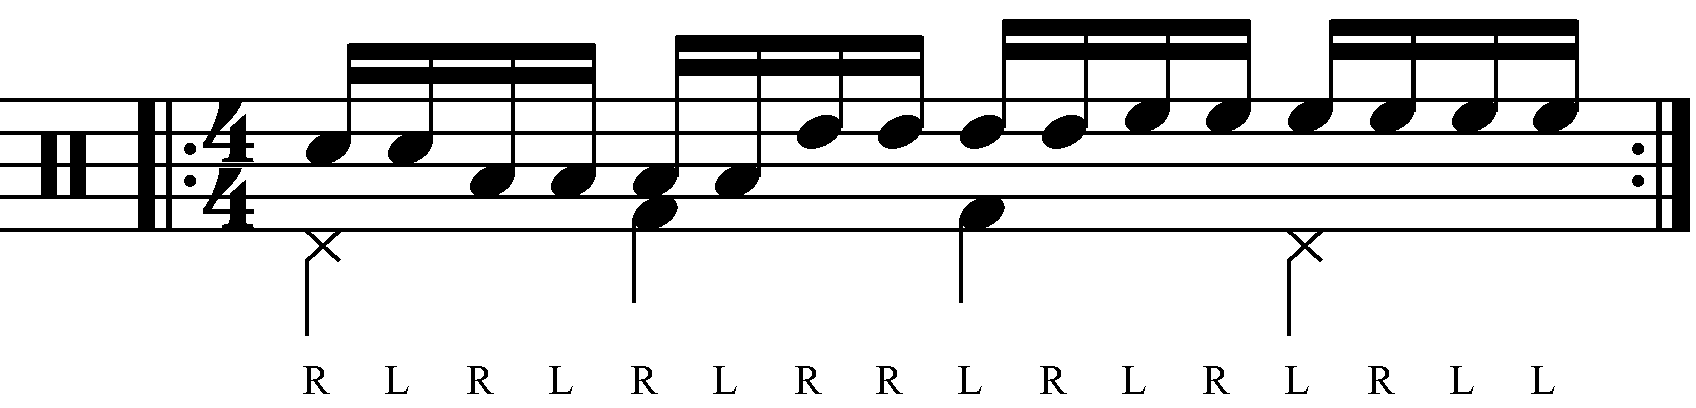 Triple Paradiddle played as staggered groups of Four